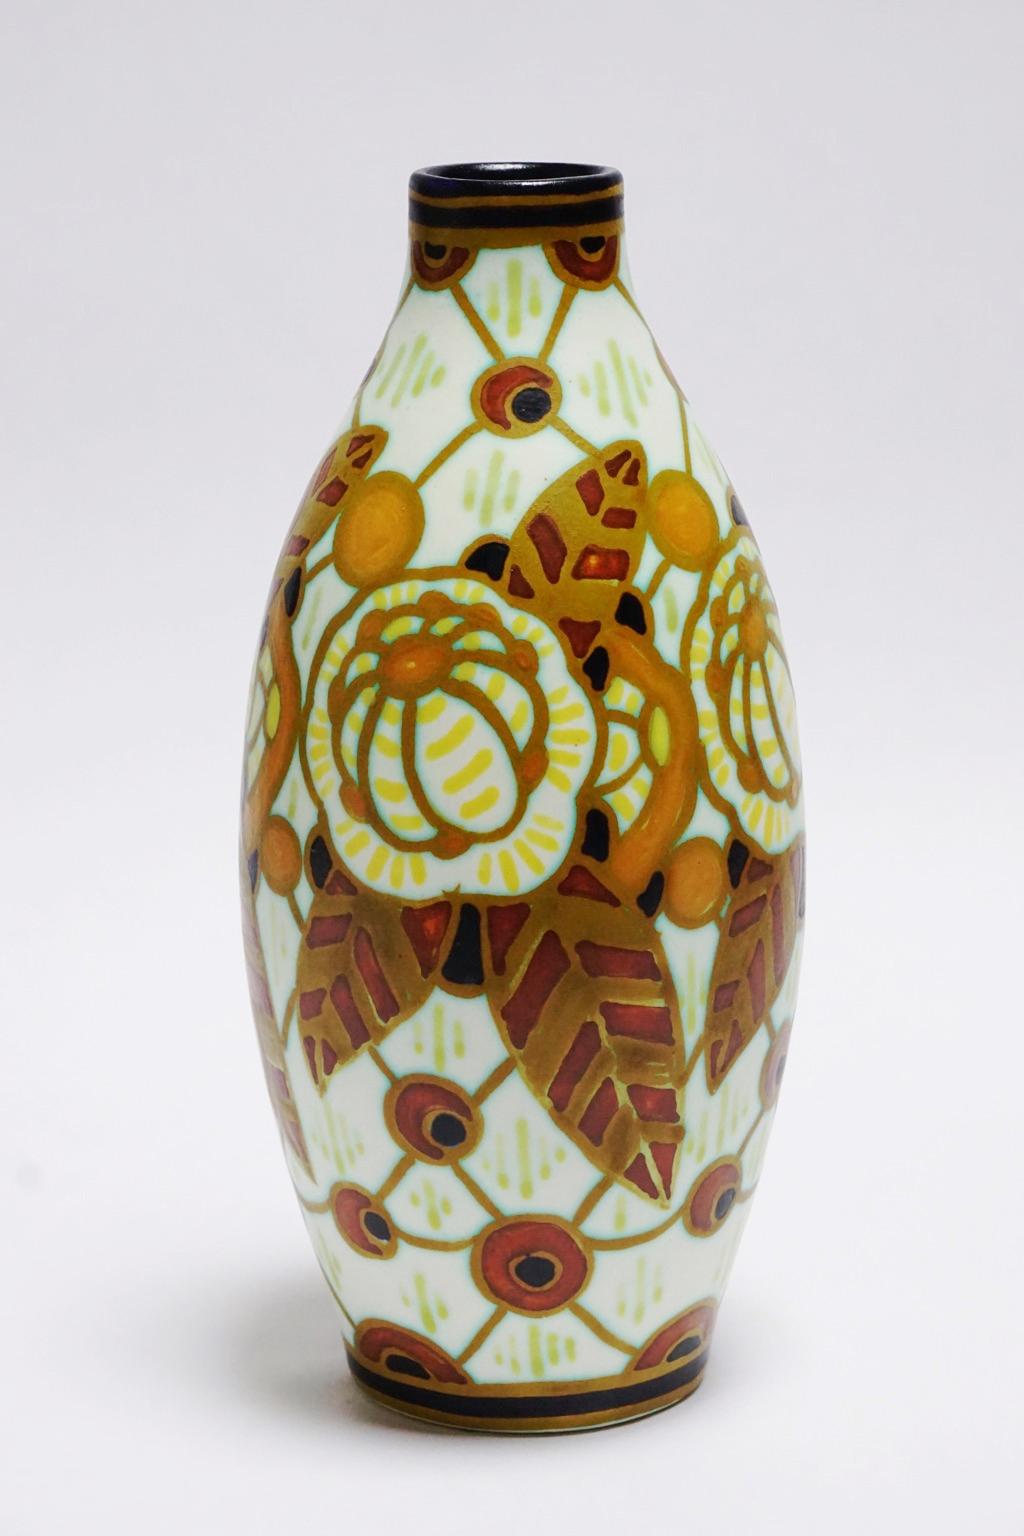 This Art Deco matte Keramis vase has a polychrome design with stylised flowers, leaves and peacock eyes in a white and light green background.
Marks: D 963. F 897. Charles Catteau.

Size: height 27 cm, diameter base 7 cm, diameter top 4 cm.
 